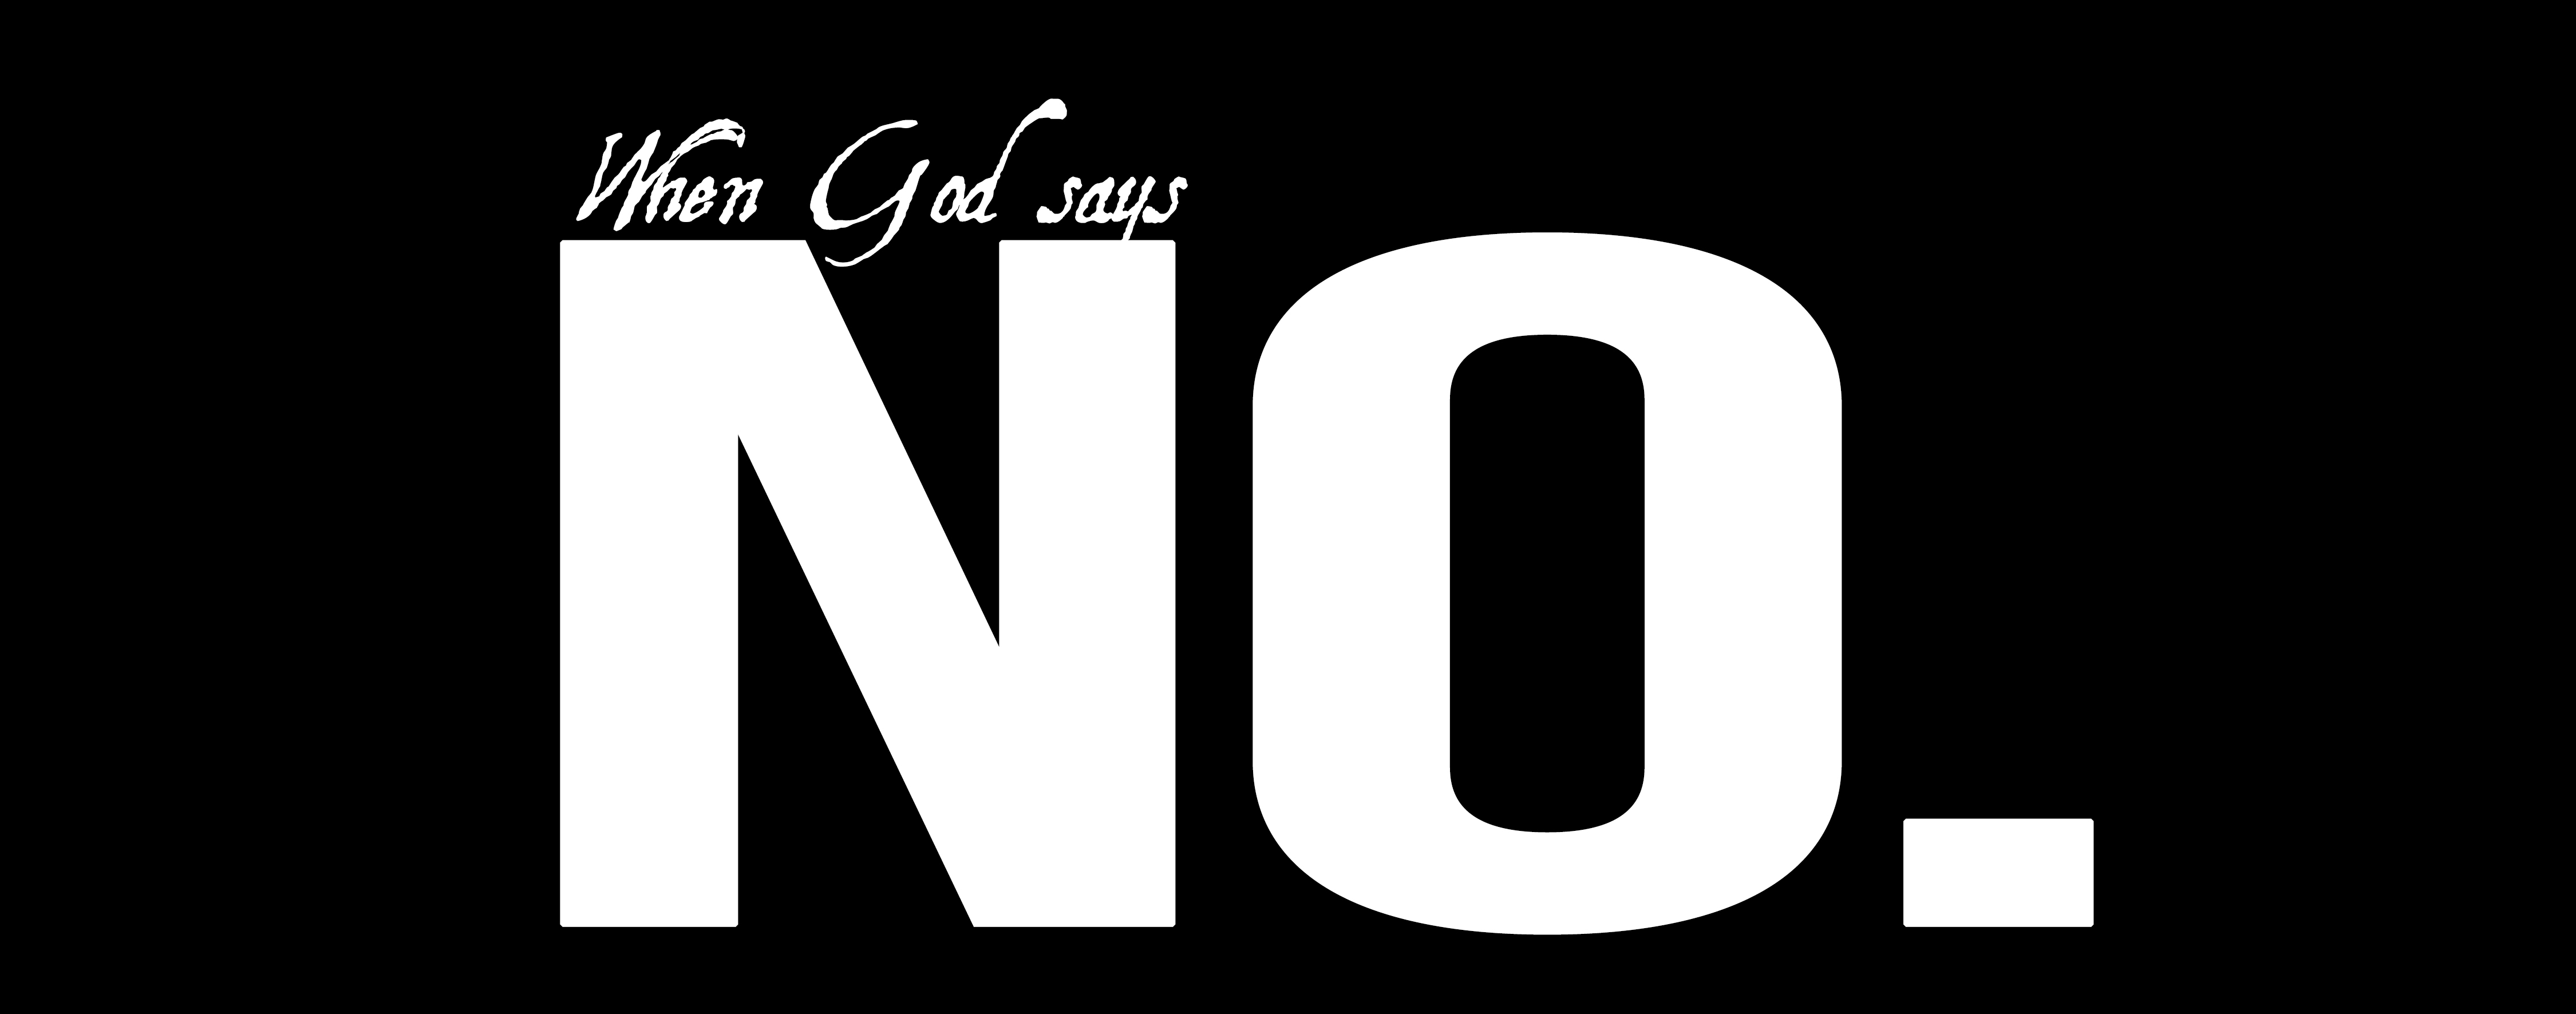 When God says NO